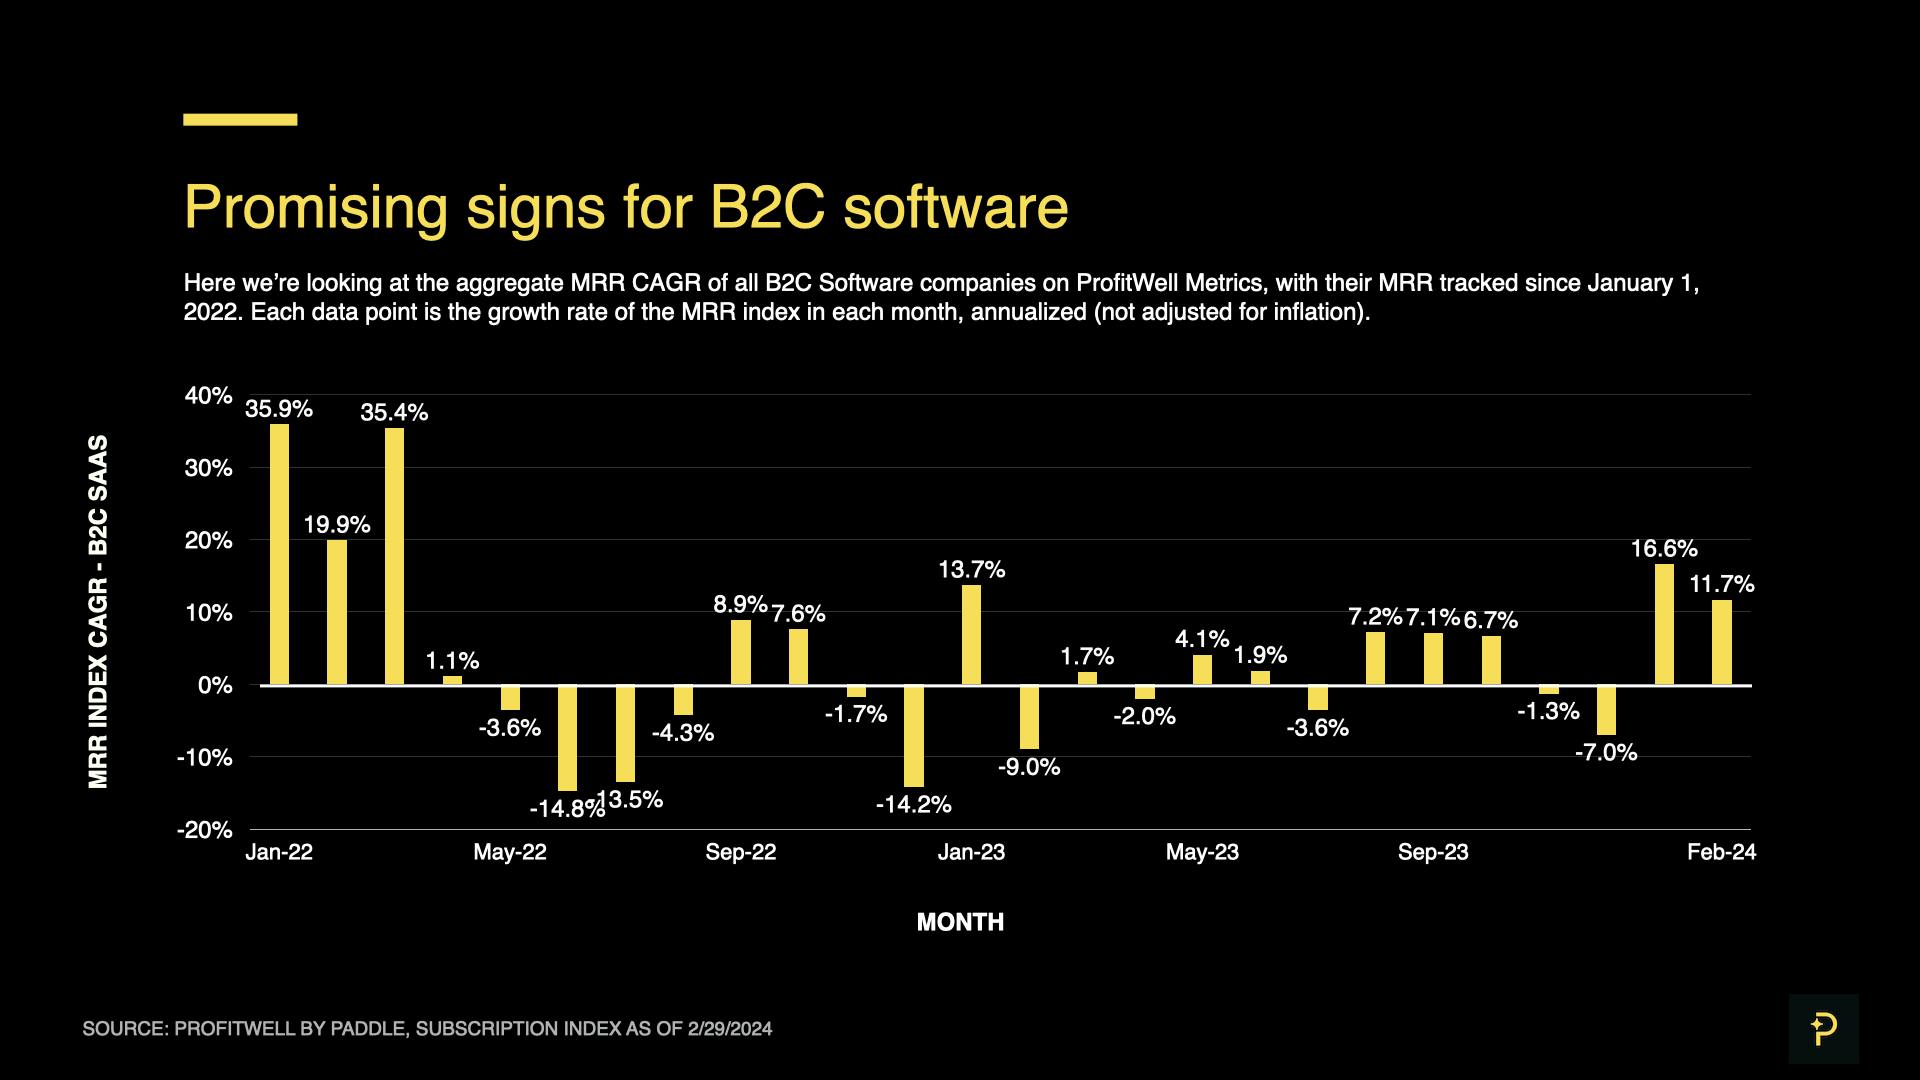 Promising signs for B2C software